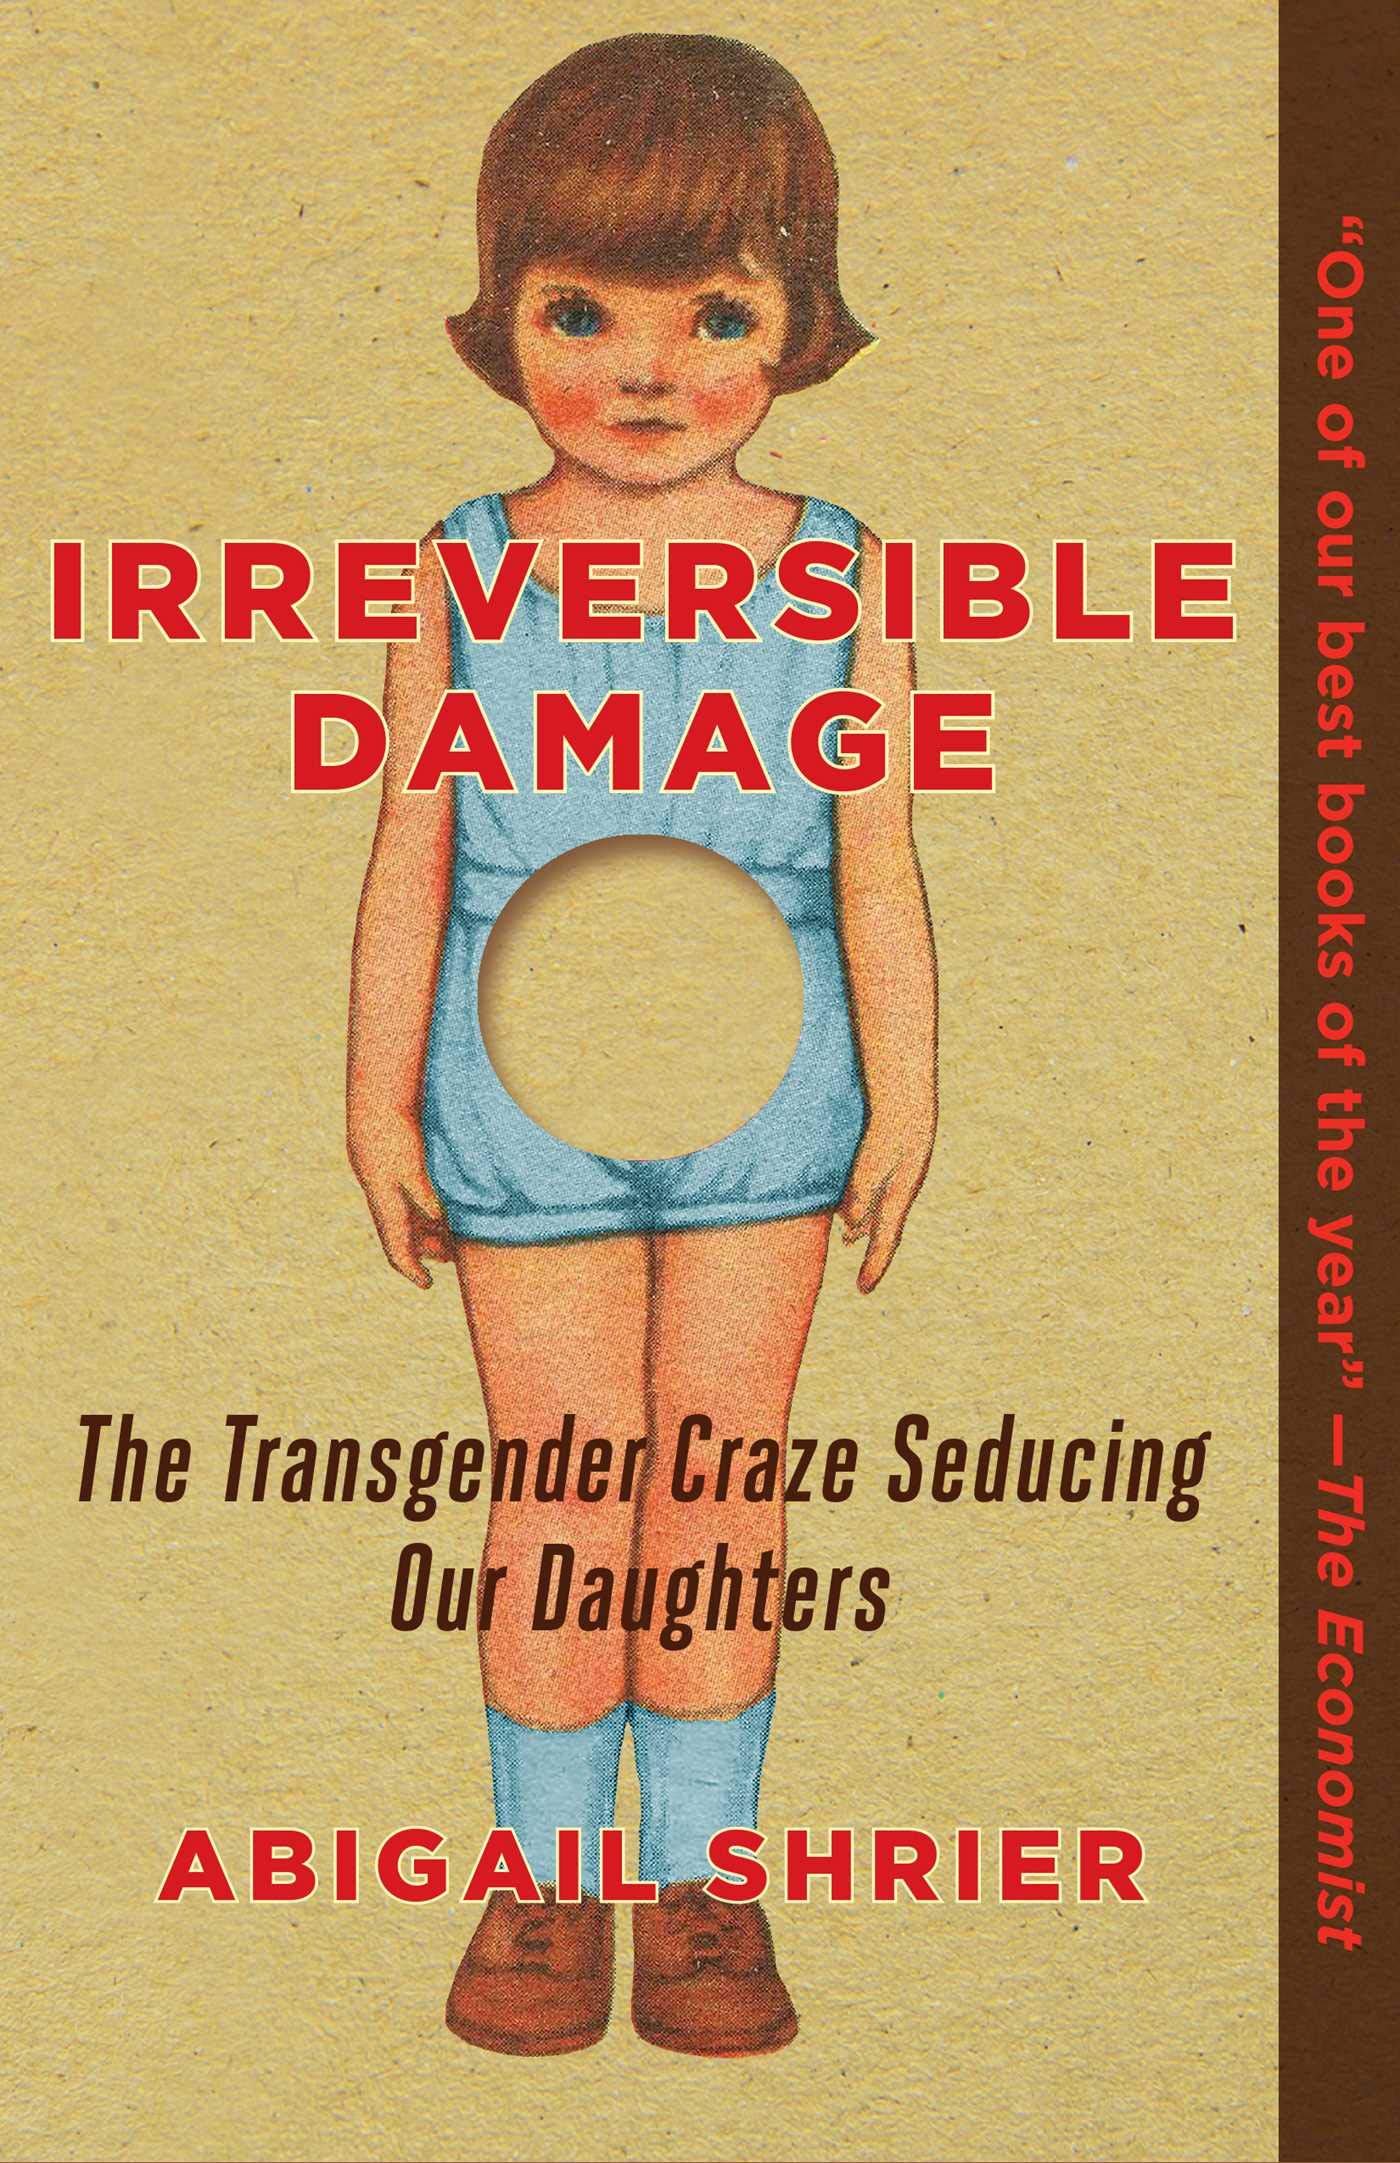 Irreversible Damage: The Transgender Craze Seducing Our Daughters (Book Review)